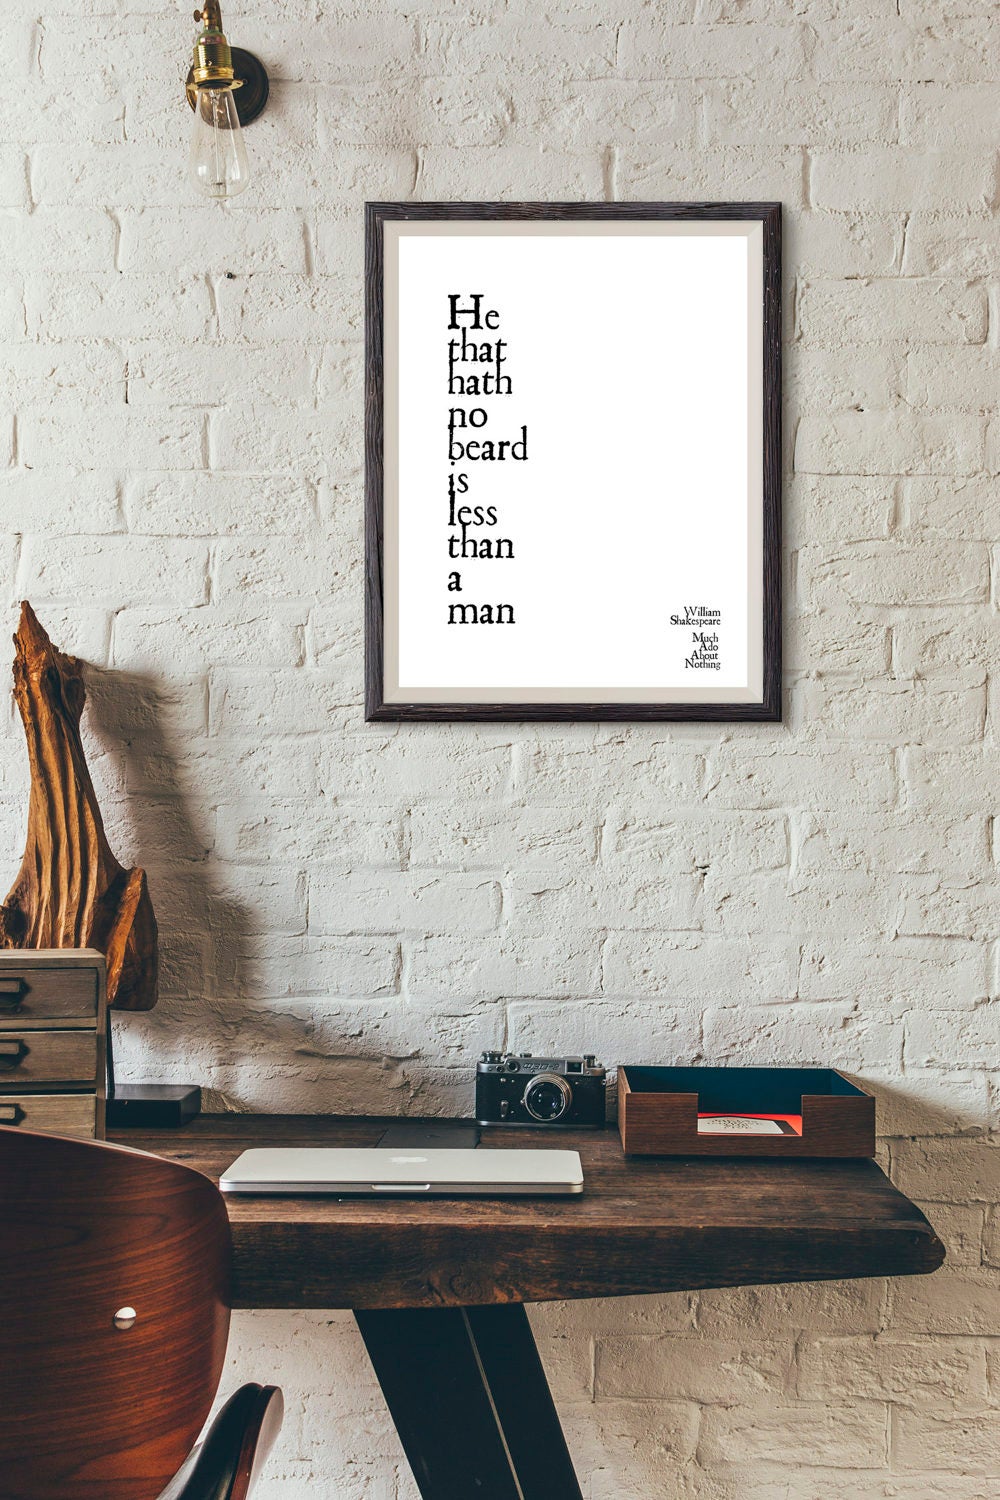 William Shakespeare Quote Print He That Hath No Beard from Much Ado About Nothing, Unframed print - BookQuoteDecor